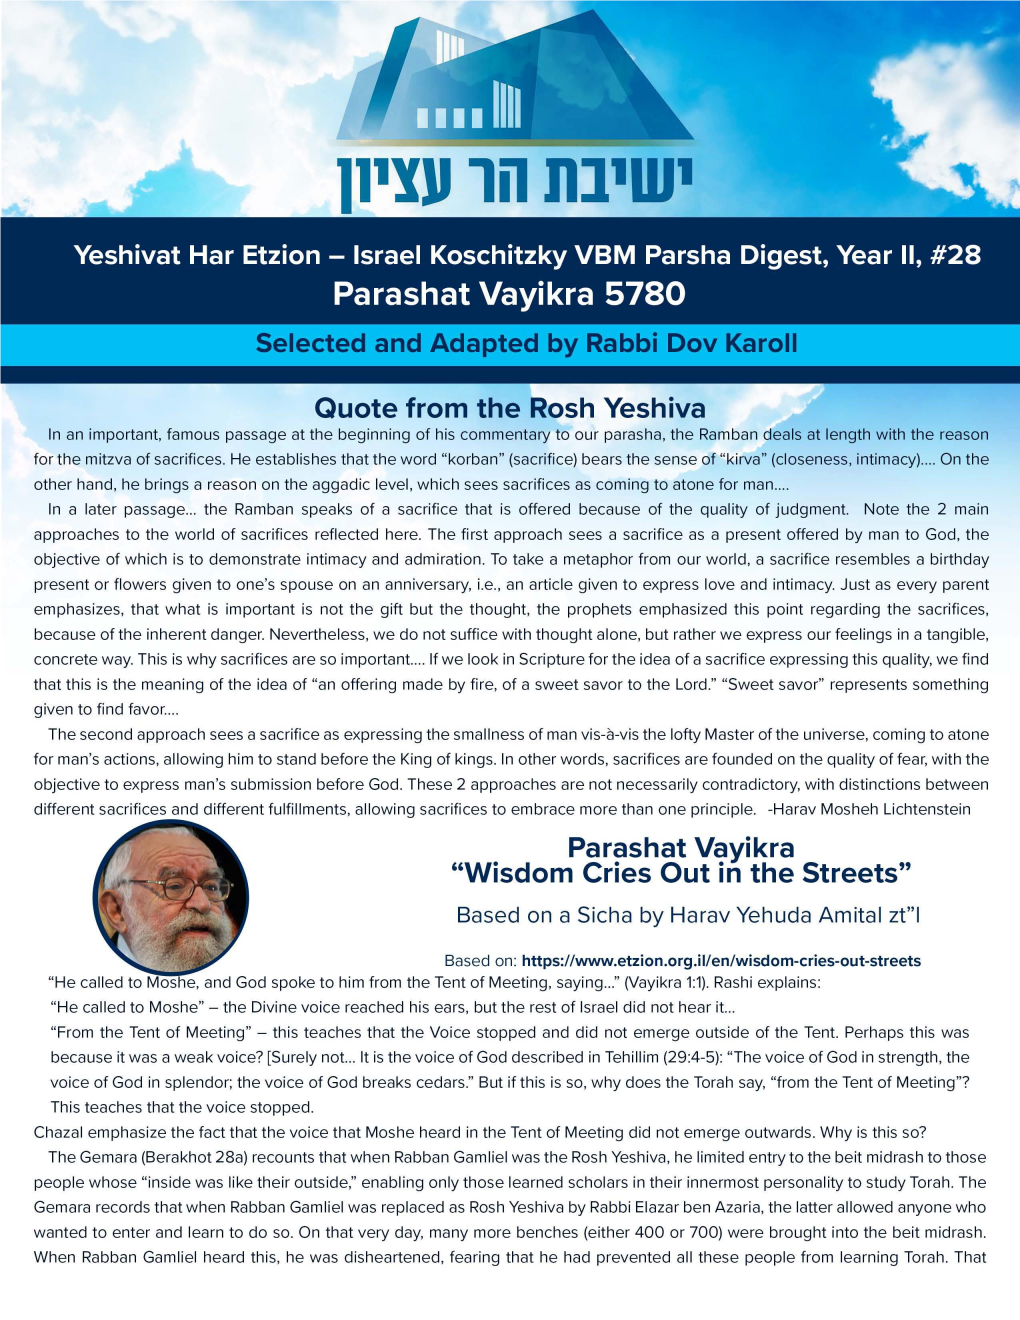 Parashat Vayikra "Wisdom Cries out in the Streets" Based on a Sicha by Harav Yehuda Arnita I Zt"I